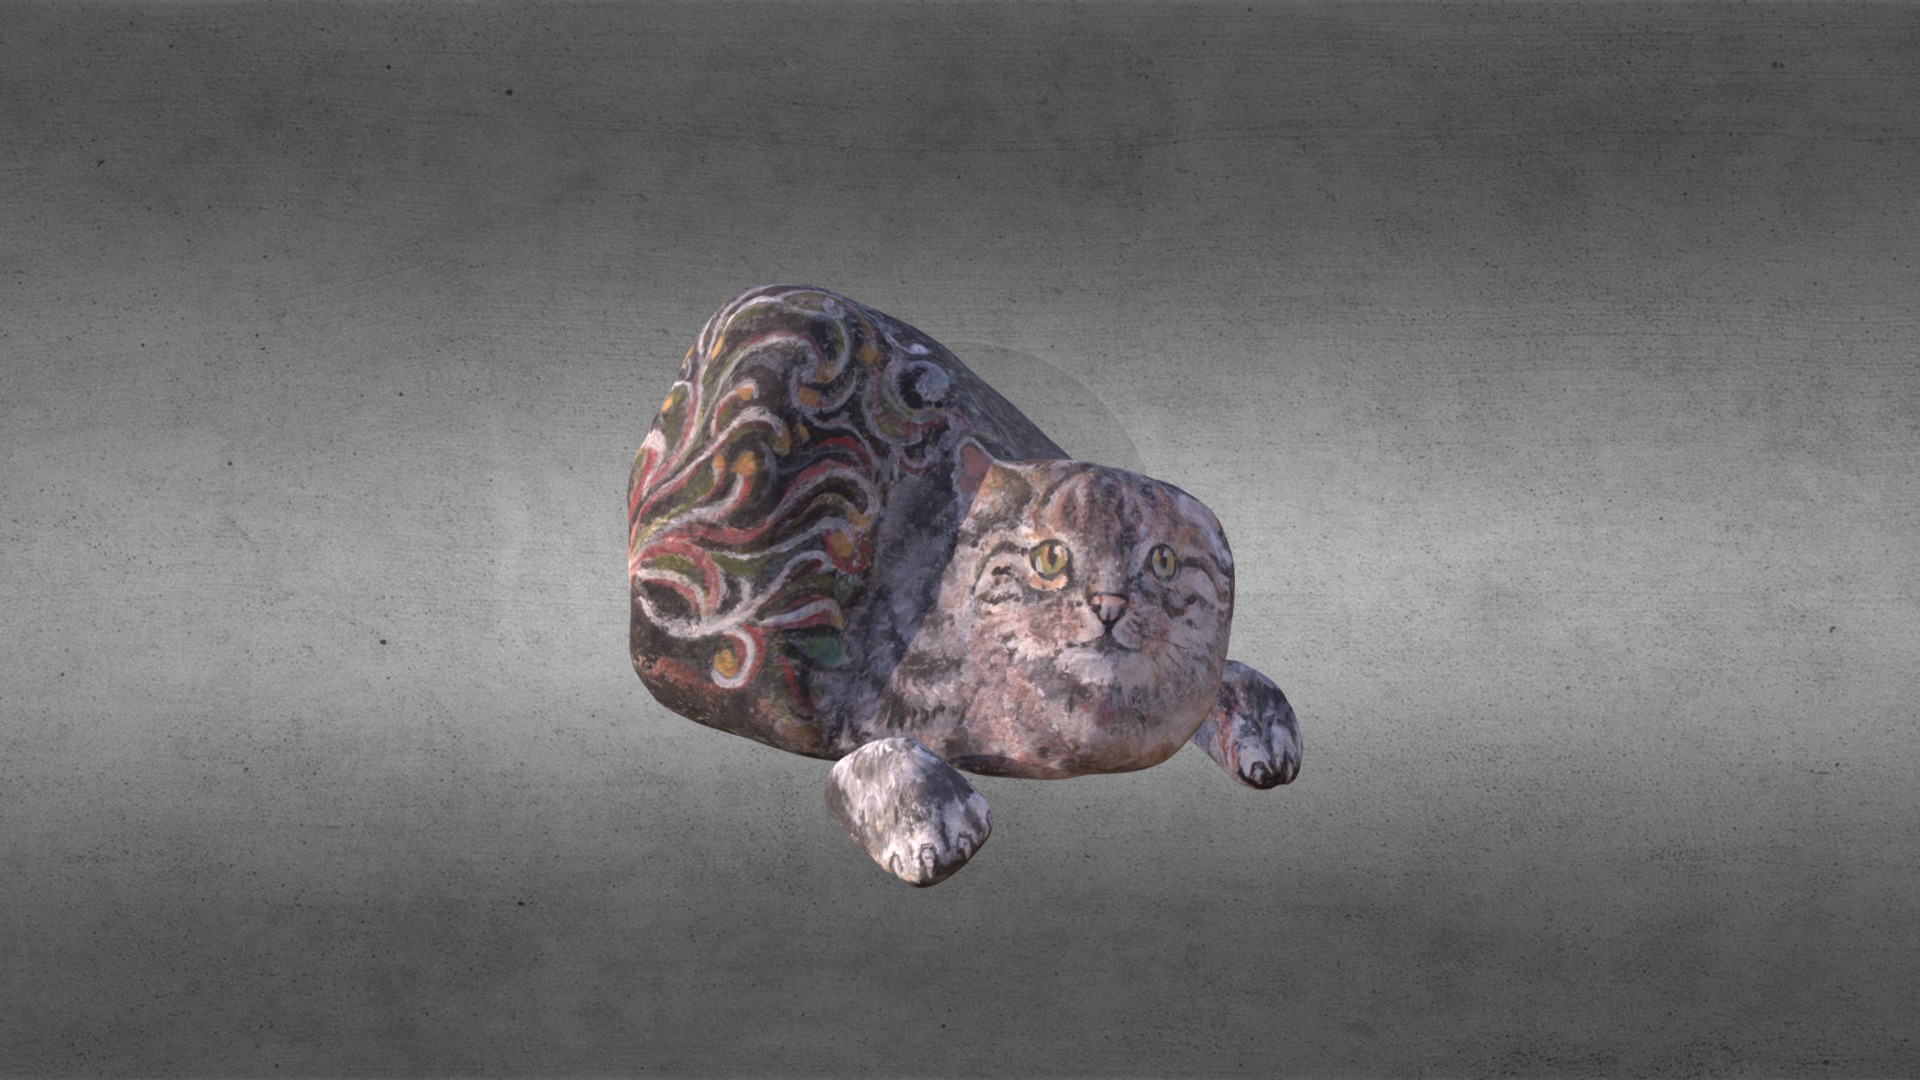 3D model Stone Painting Art – Cat4 - This is a 3D model of the Stone Painting Art - Cat4. The 3D model is about a turtle on a concrete surface.